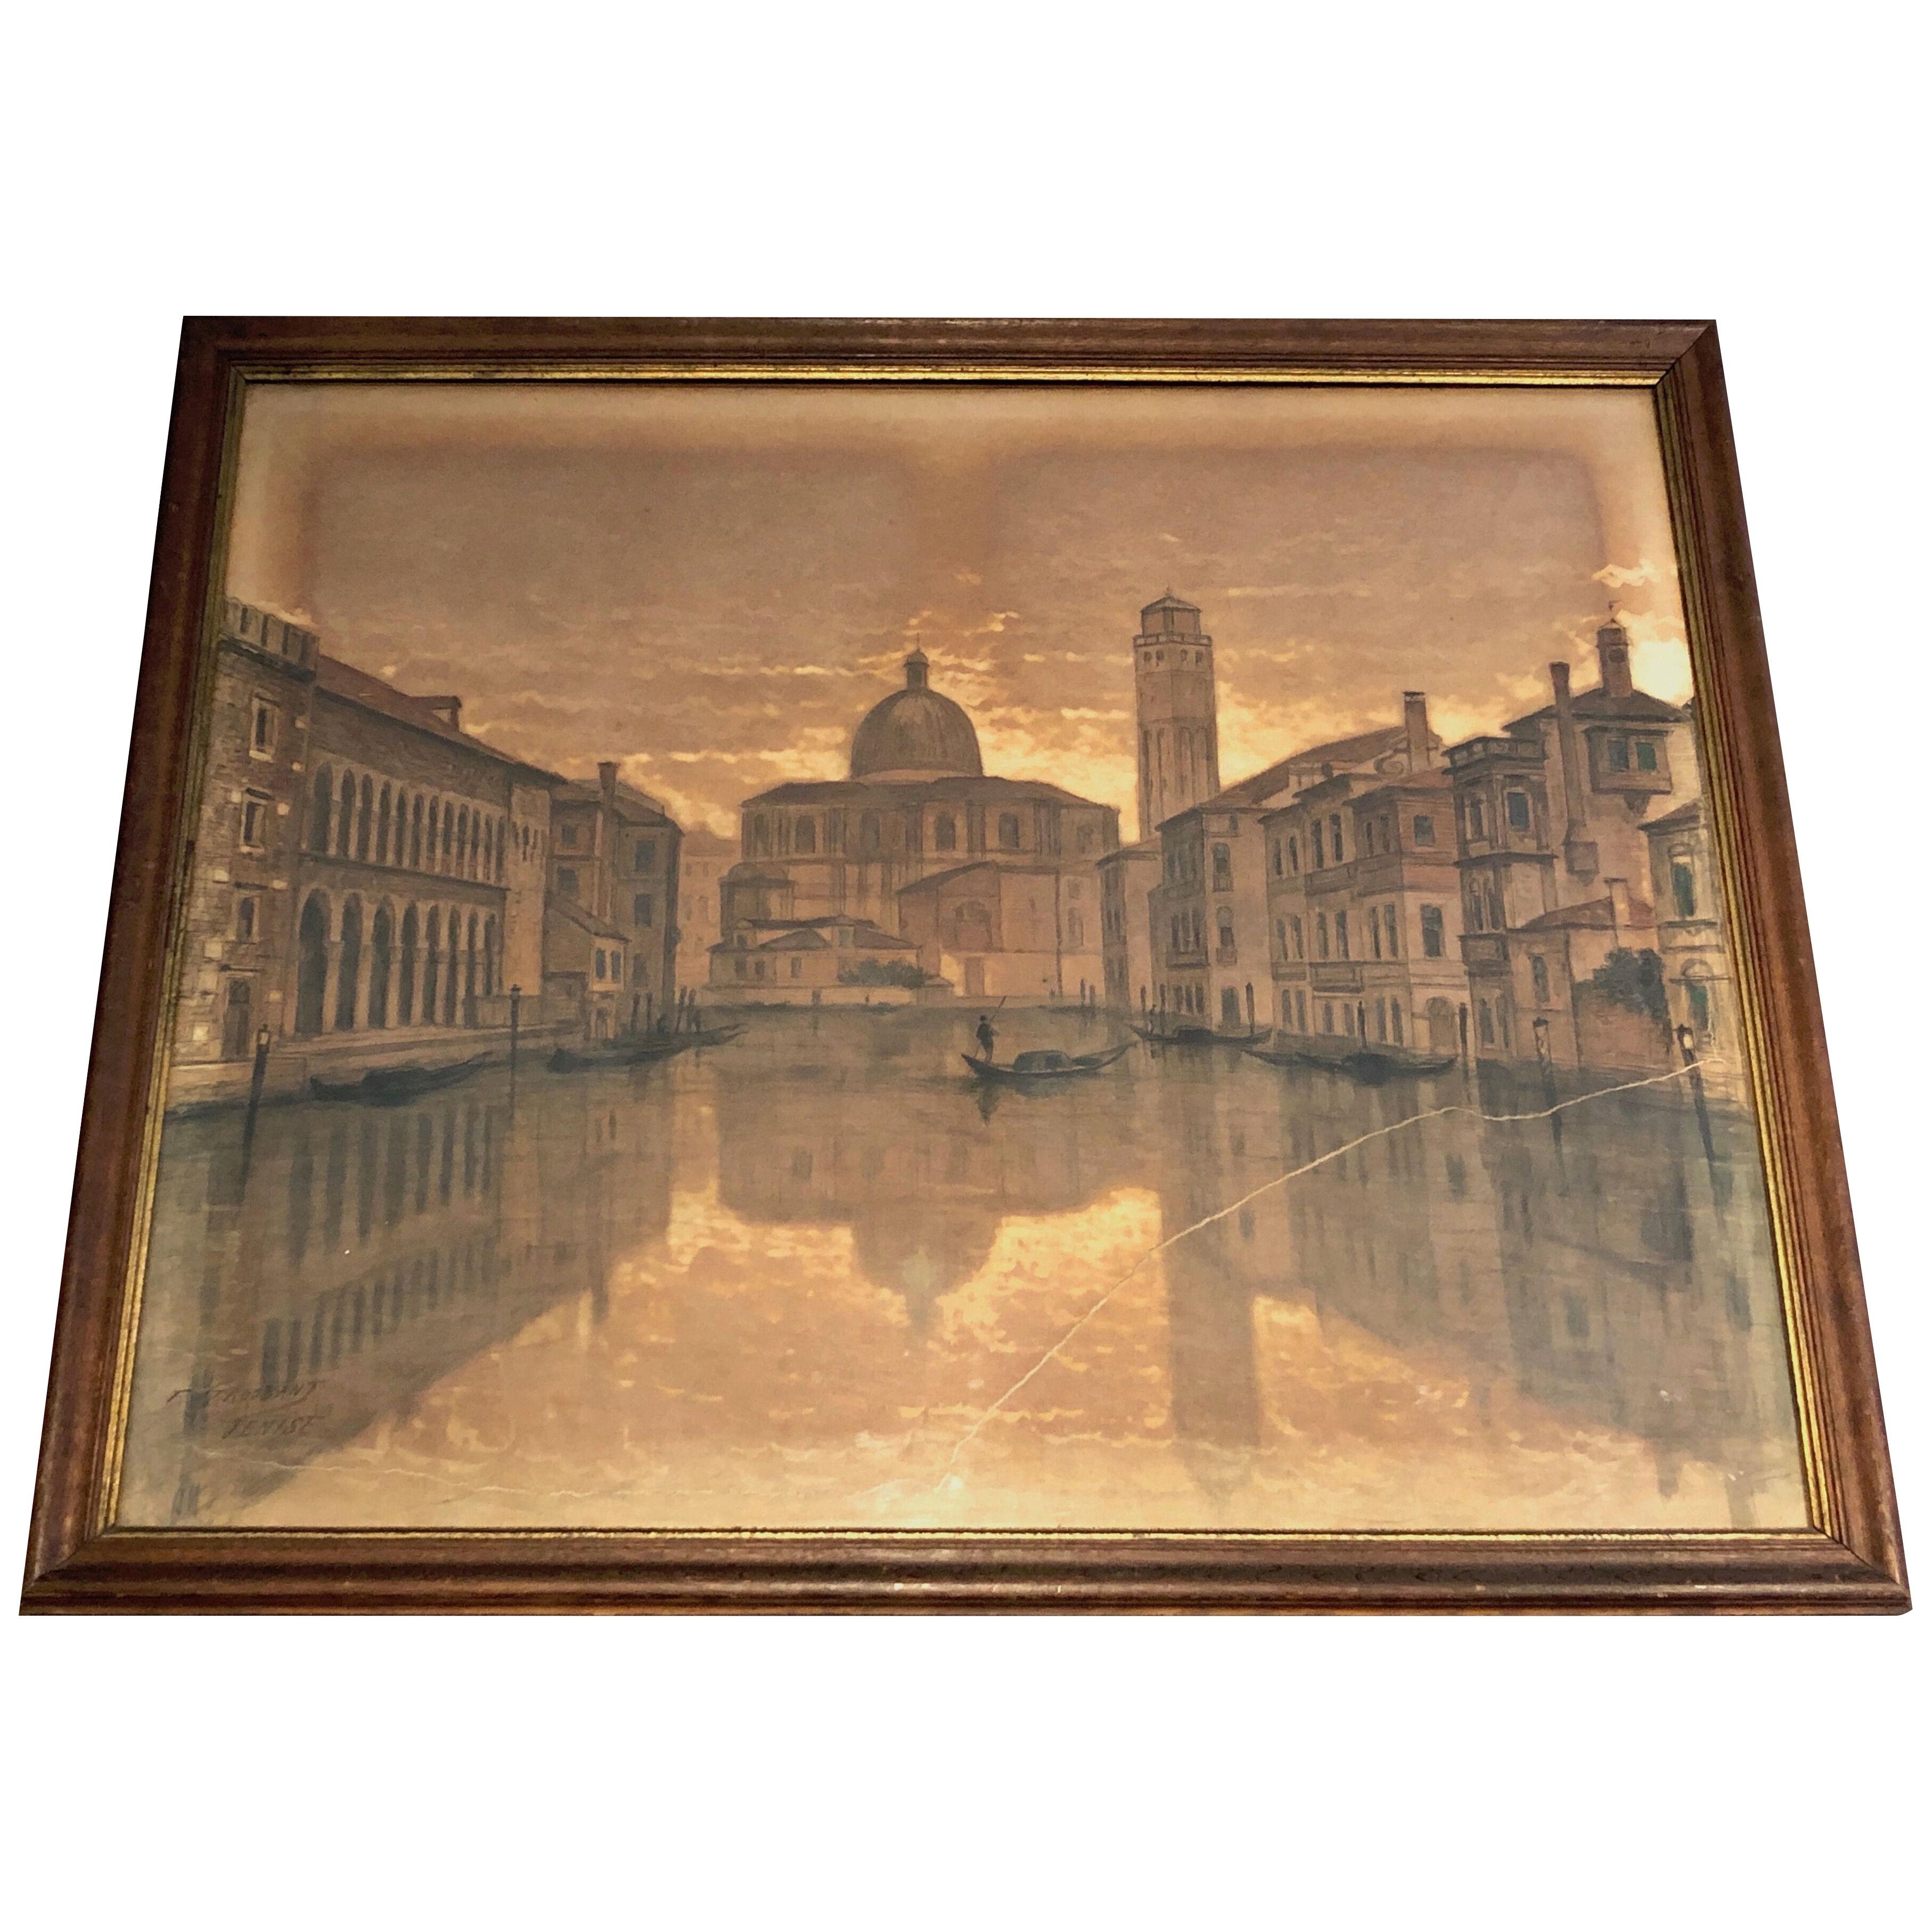 Large Venice View. Signed by François Stroobant (1819-1916)